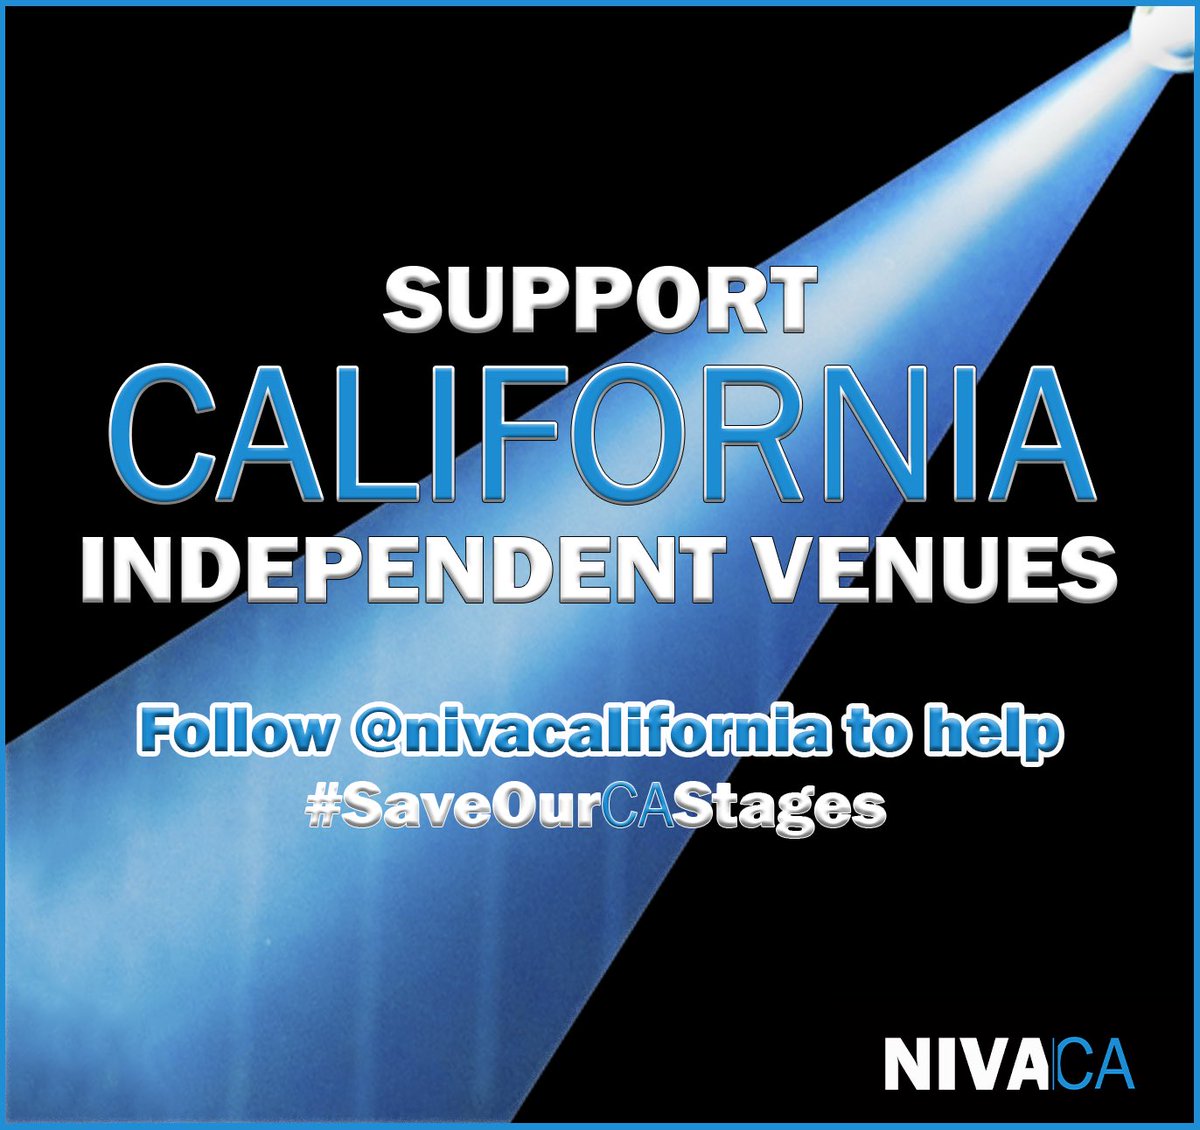 Indie venues are not only the foundation of our local creative economies—they serve as catalysts for socio-economic inclusion and powerful platforms for emerging and independent artists. Please support a venues grant program @GavinNewsom #saveourCAstages